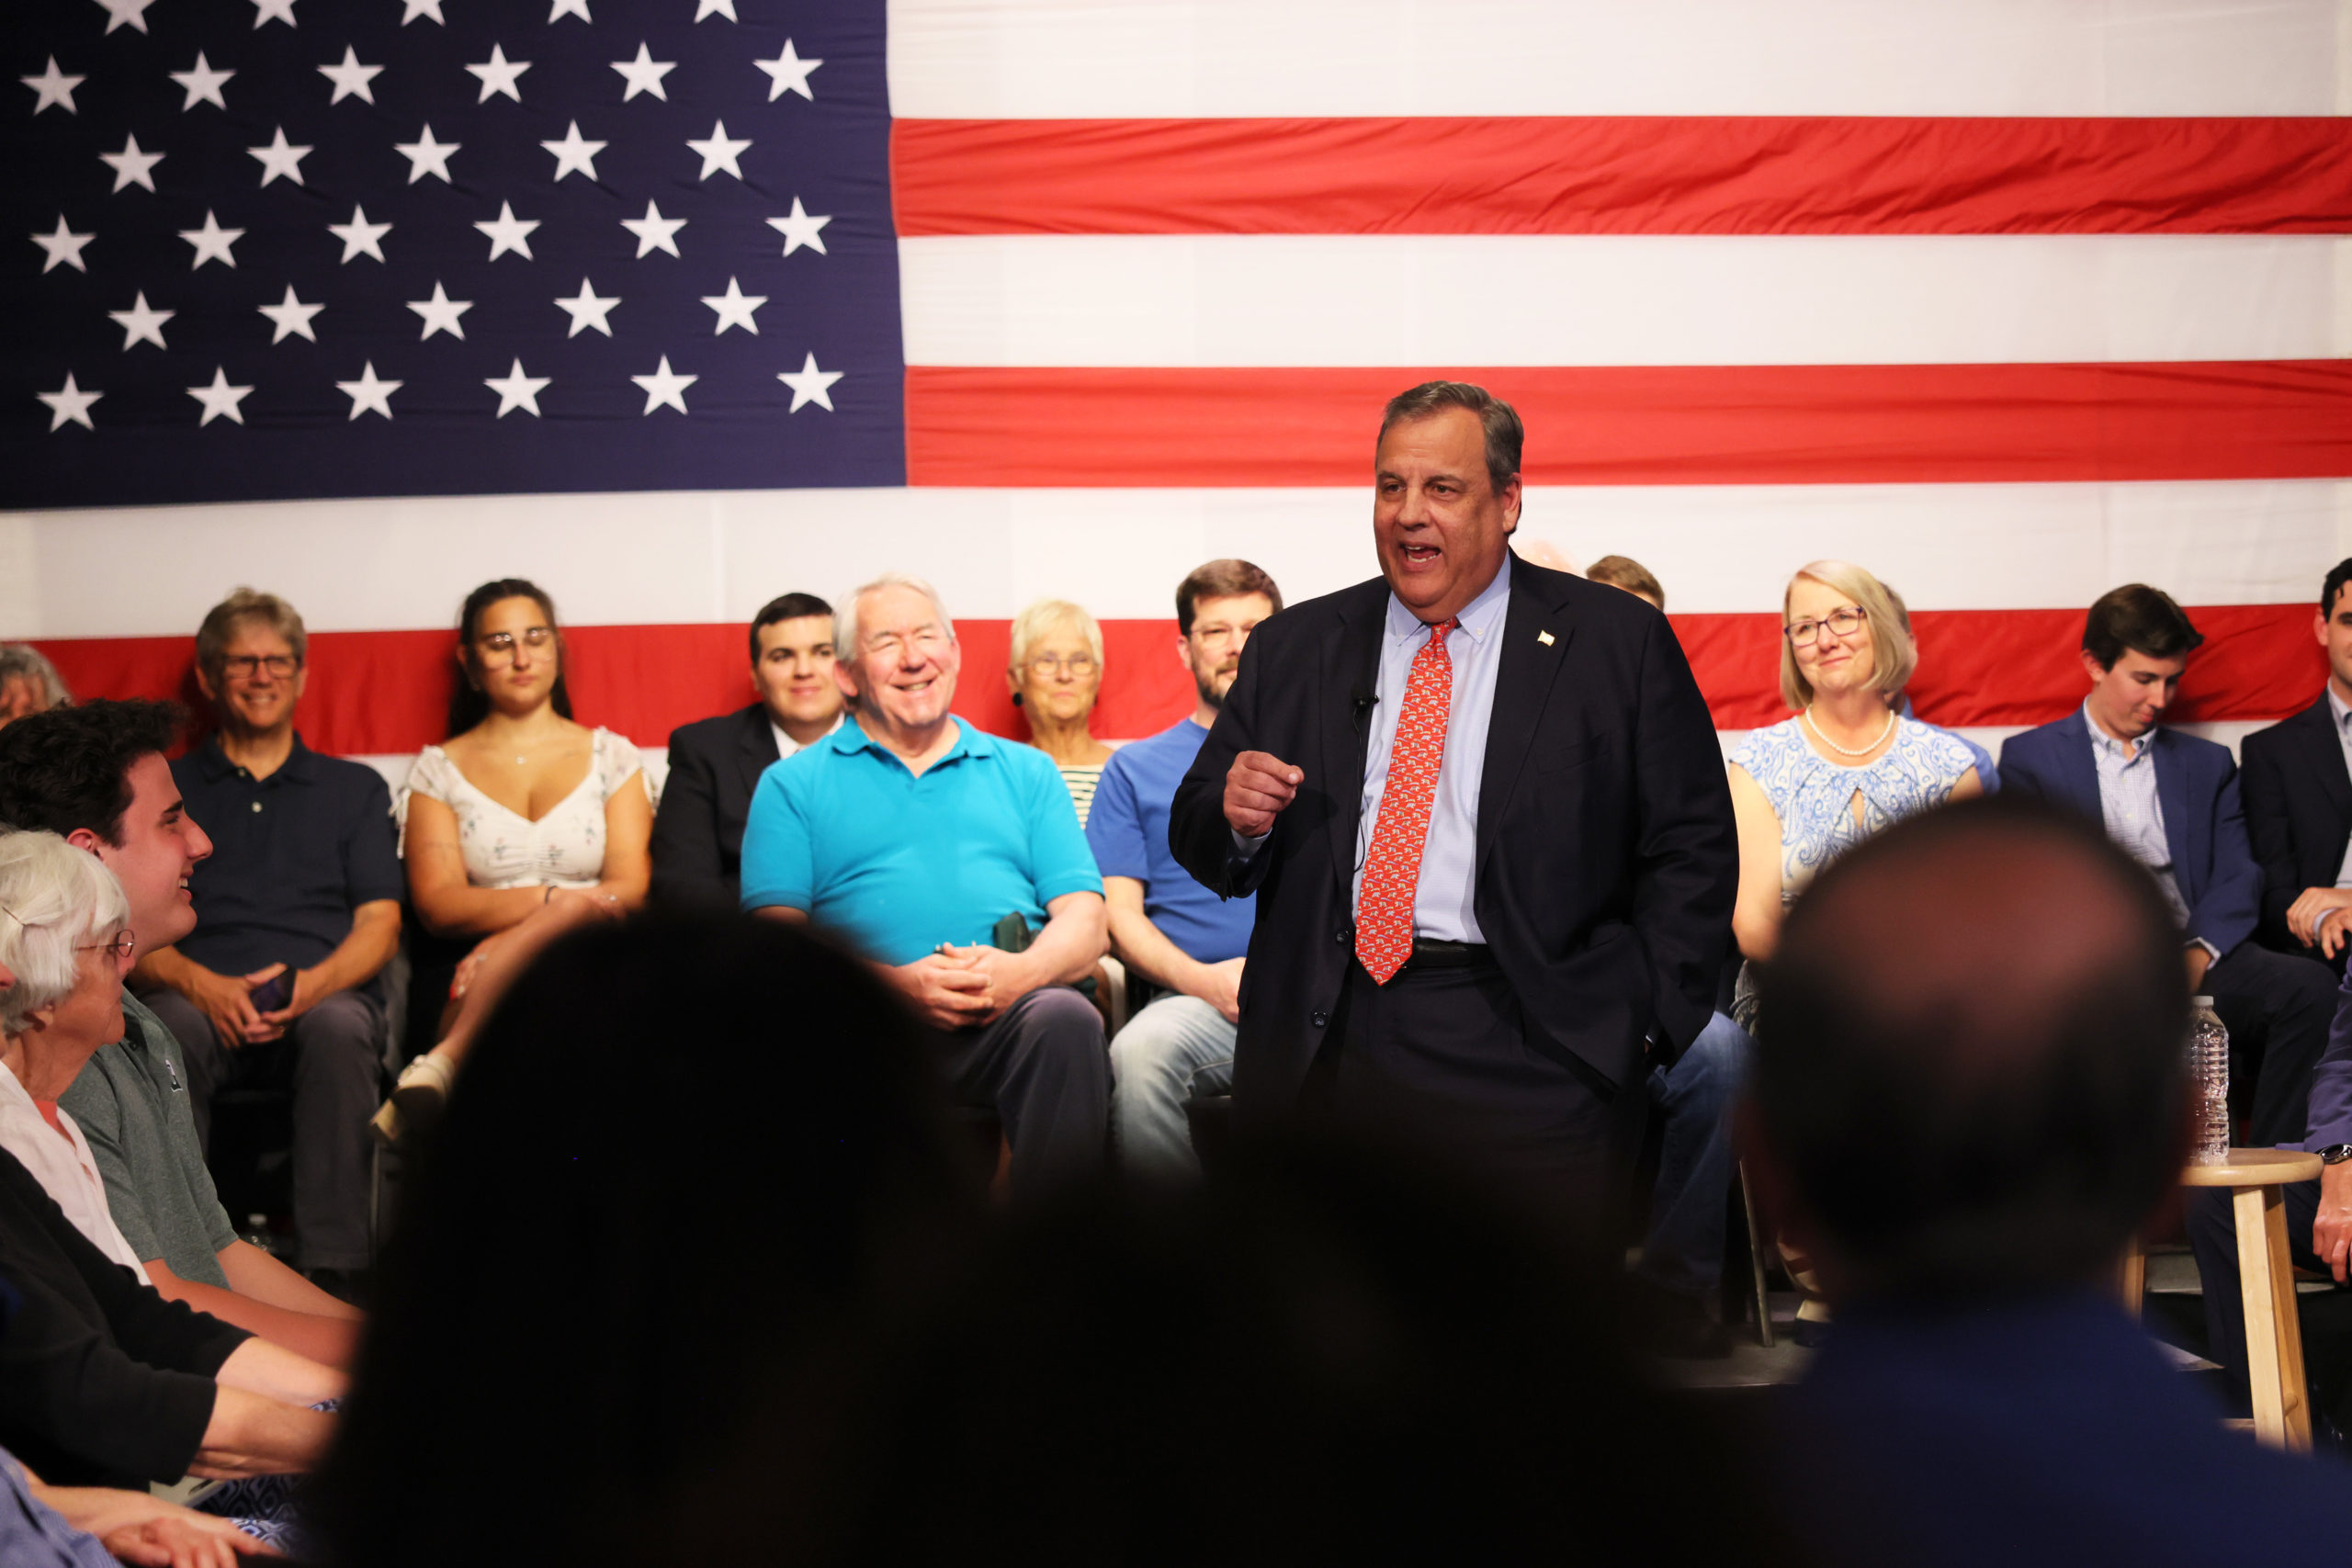 MANCHESTER, NEW HAMPSHIRE - JUNE 06: Former New Jersey Gov. Chris Christie speaks at a town-hall-style event at the New Hampshire Institute of Politics at Saint Anselm College on June 06, 2023 in Manchester, New Hampshire. (Michael M. Santiago/Getty Images)